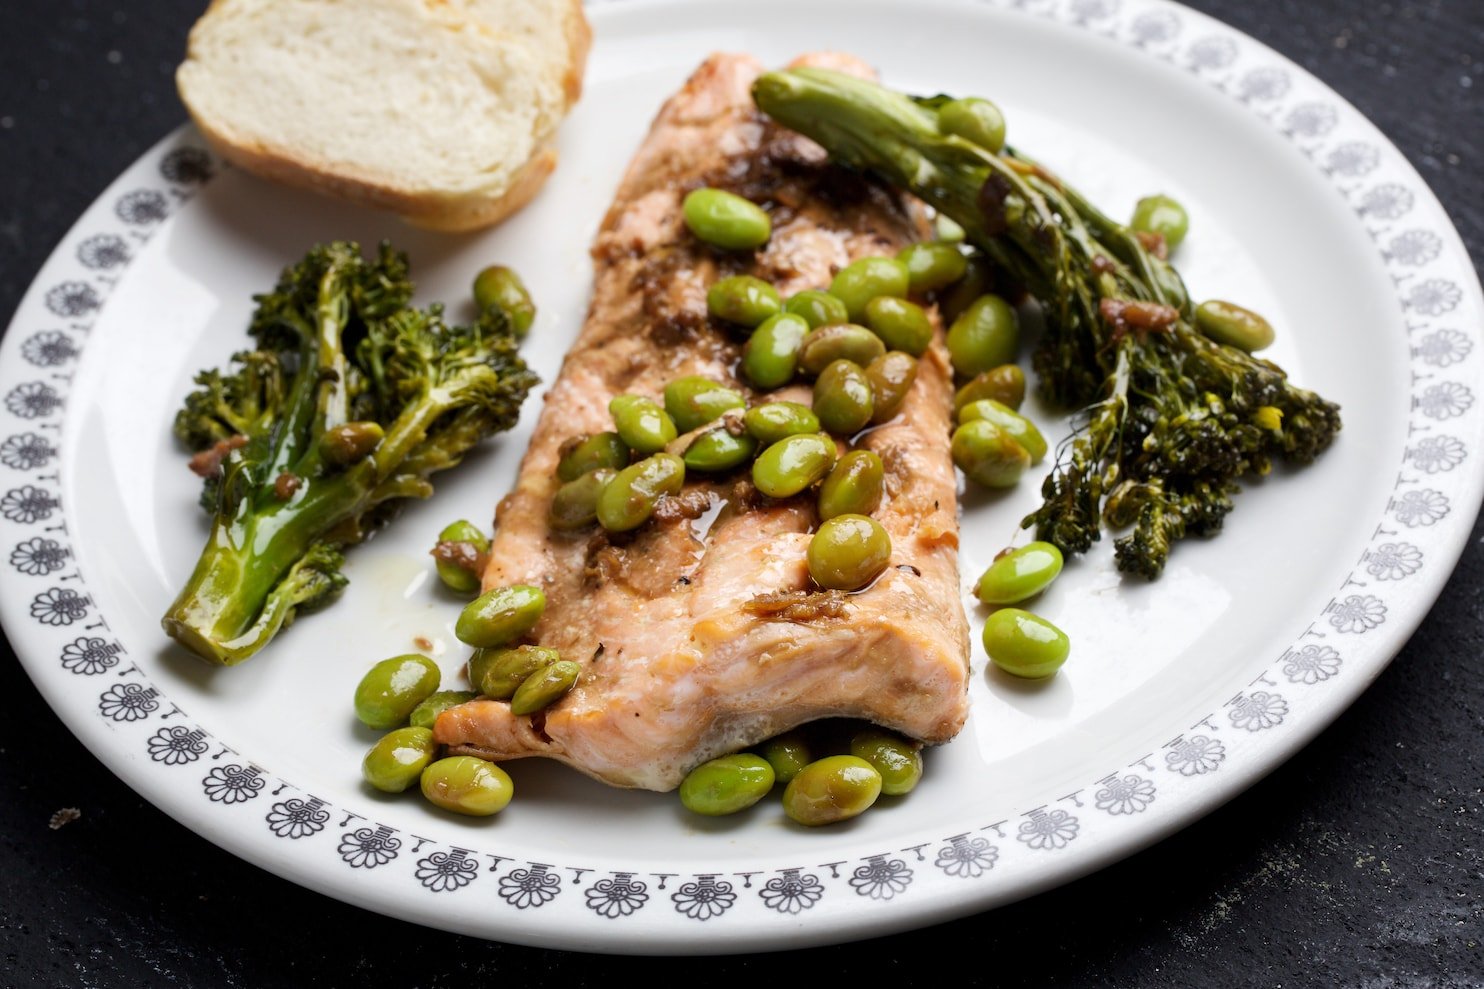 Arctic Char, Broccolini and Edamame With Soy-Ginger Sauce - The Washington Post